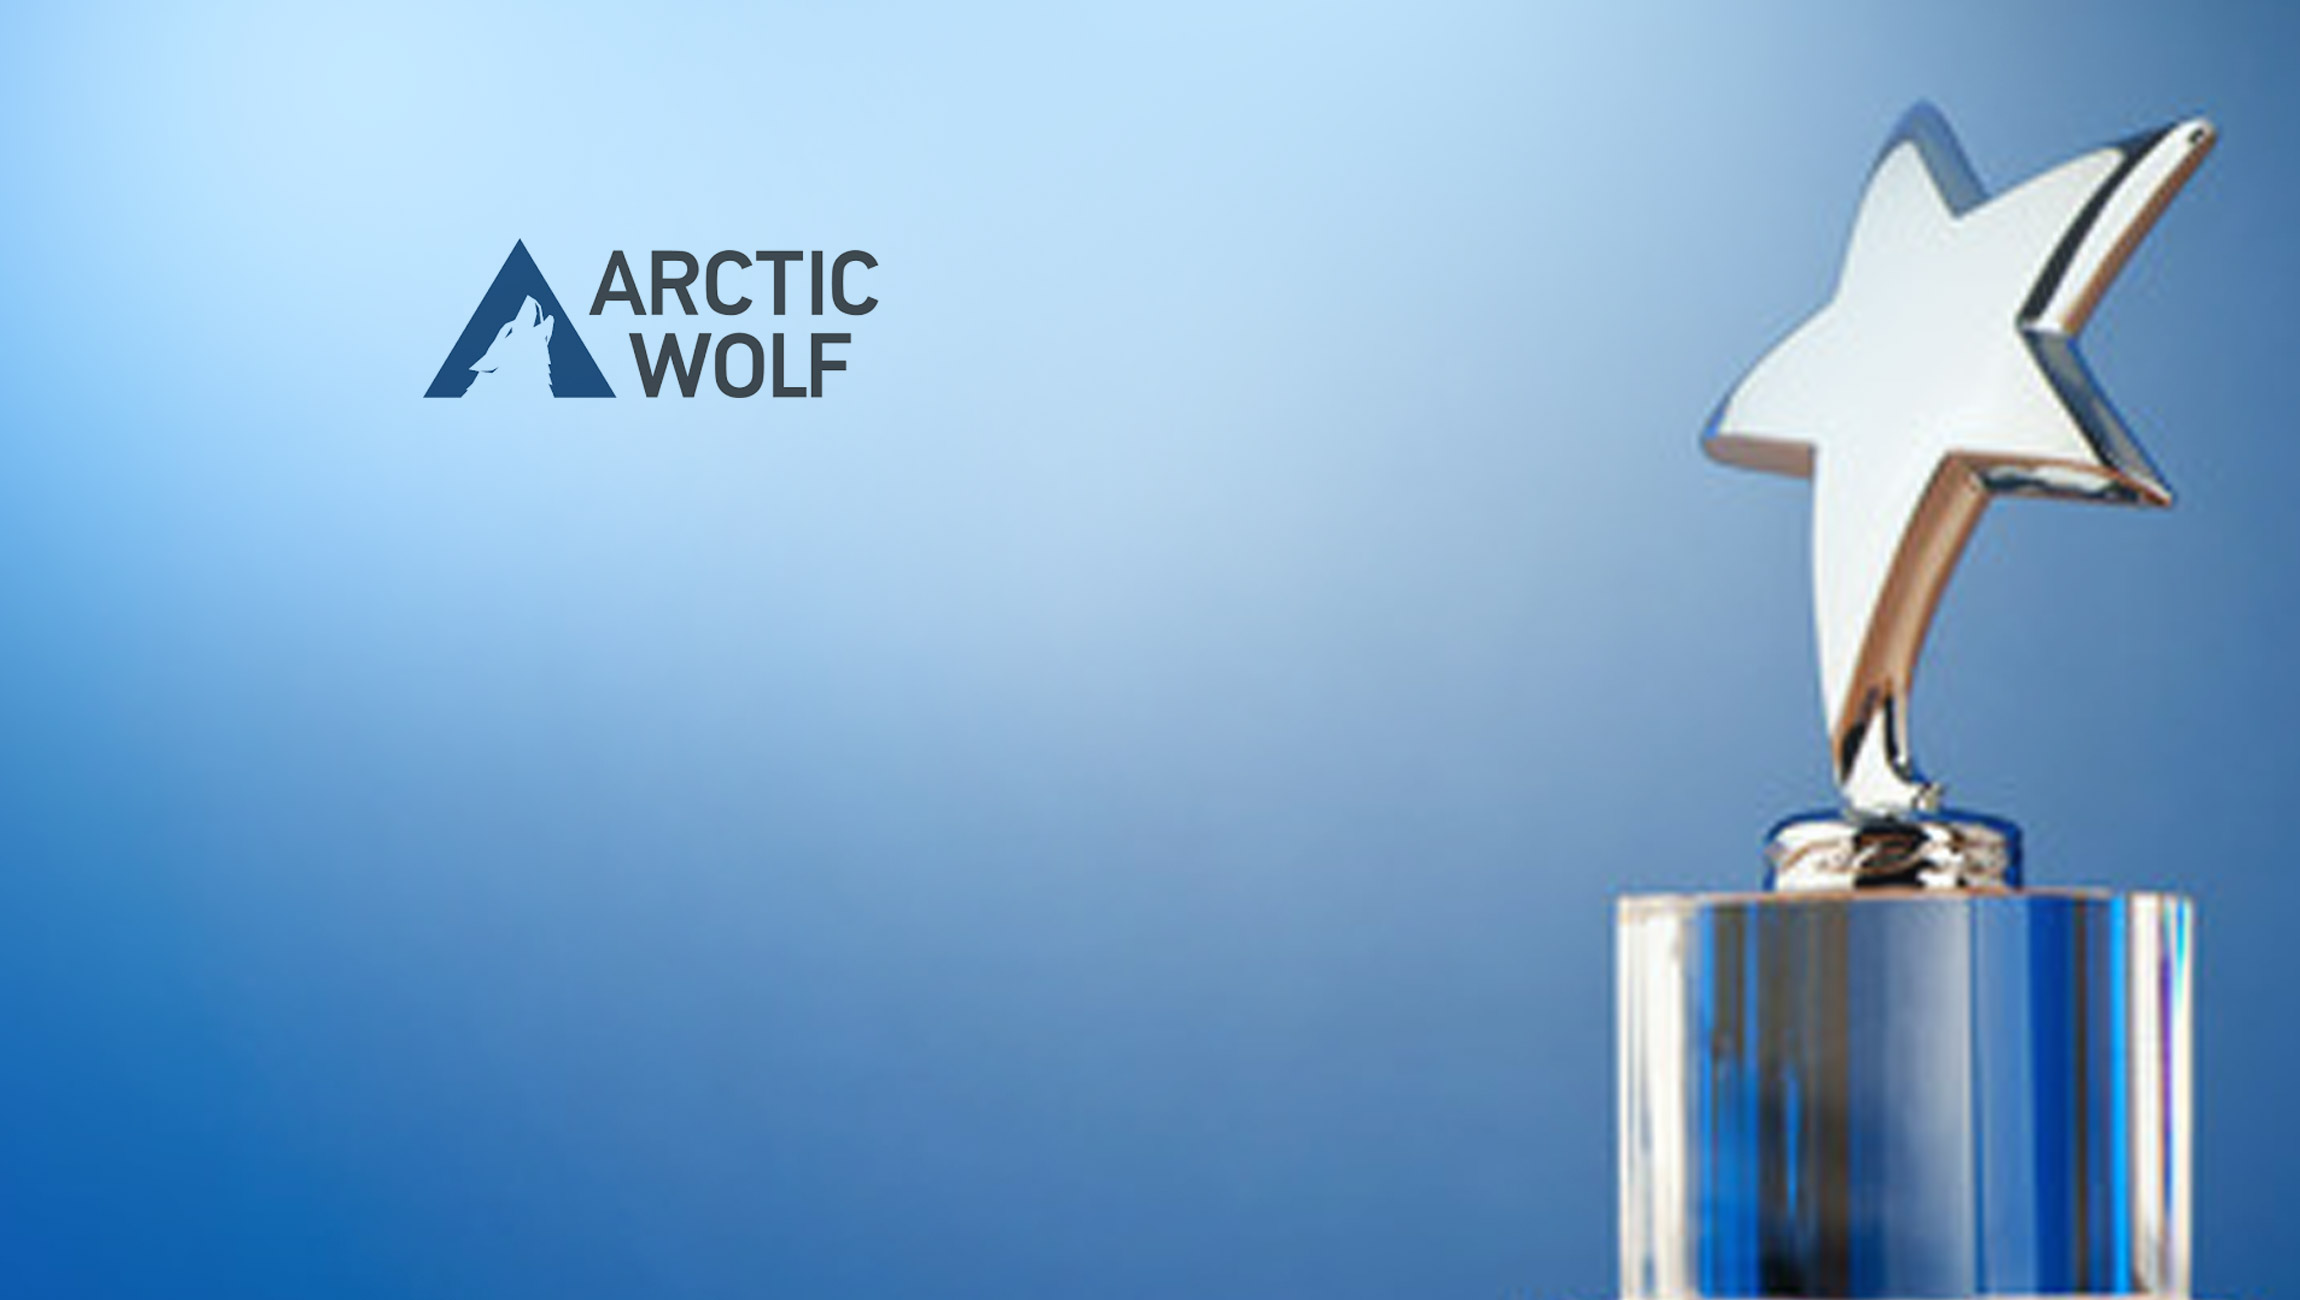 CRN® Honors Arctic Wolf With 5-Star Rating in 2022 Partner Program Guide